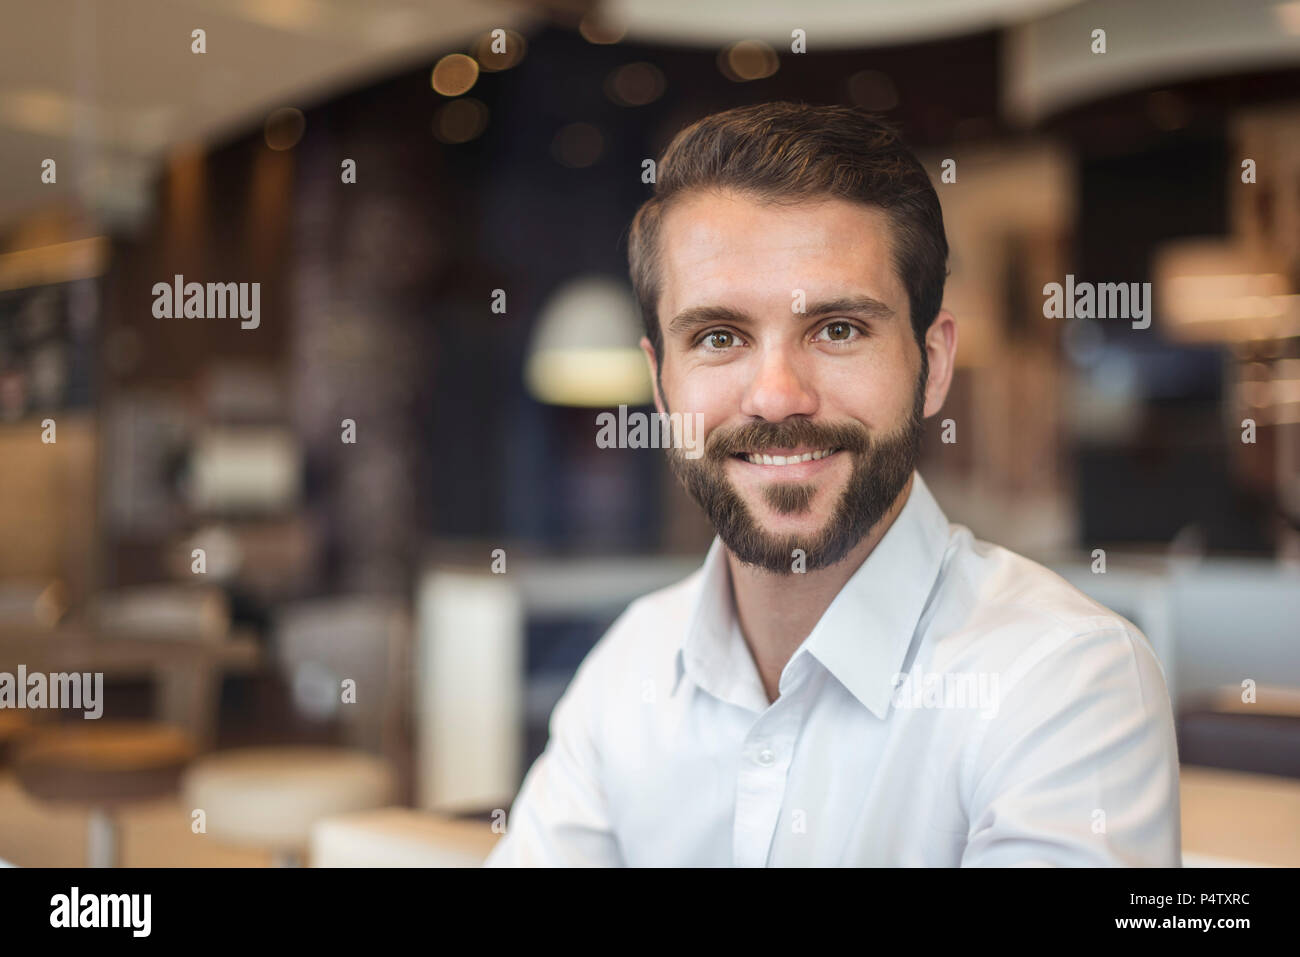 Portrait of smiling young businessman in a cafe Stock Photo